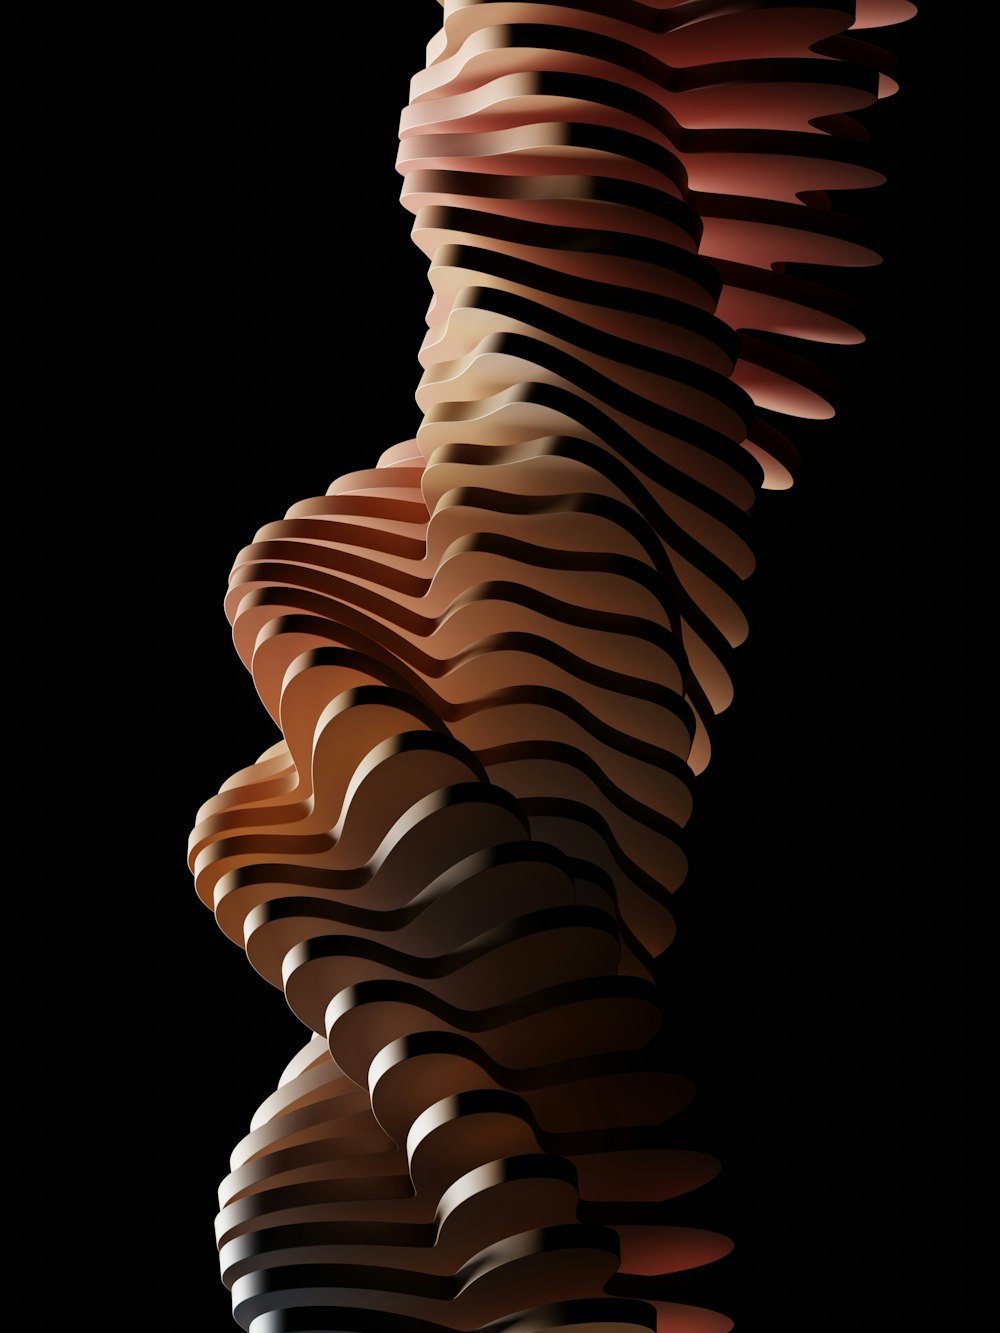 a very tall stack of stacked objects on a black background